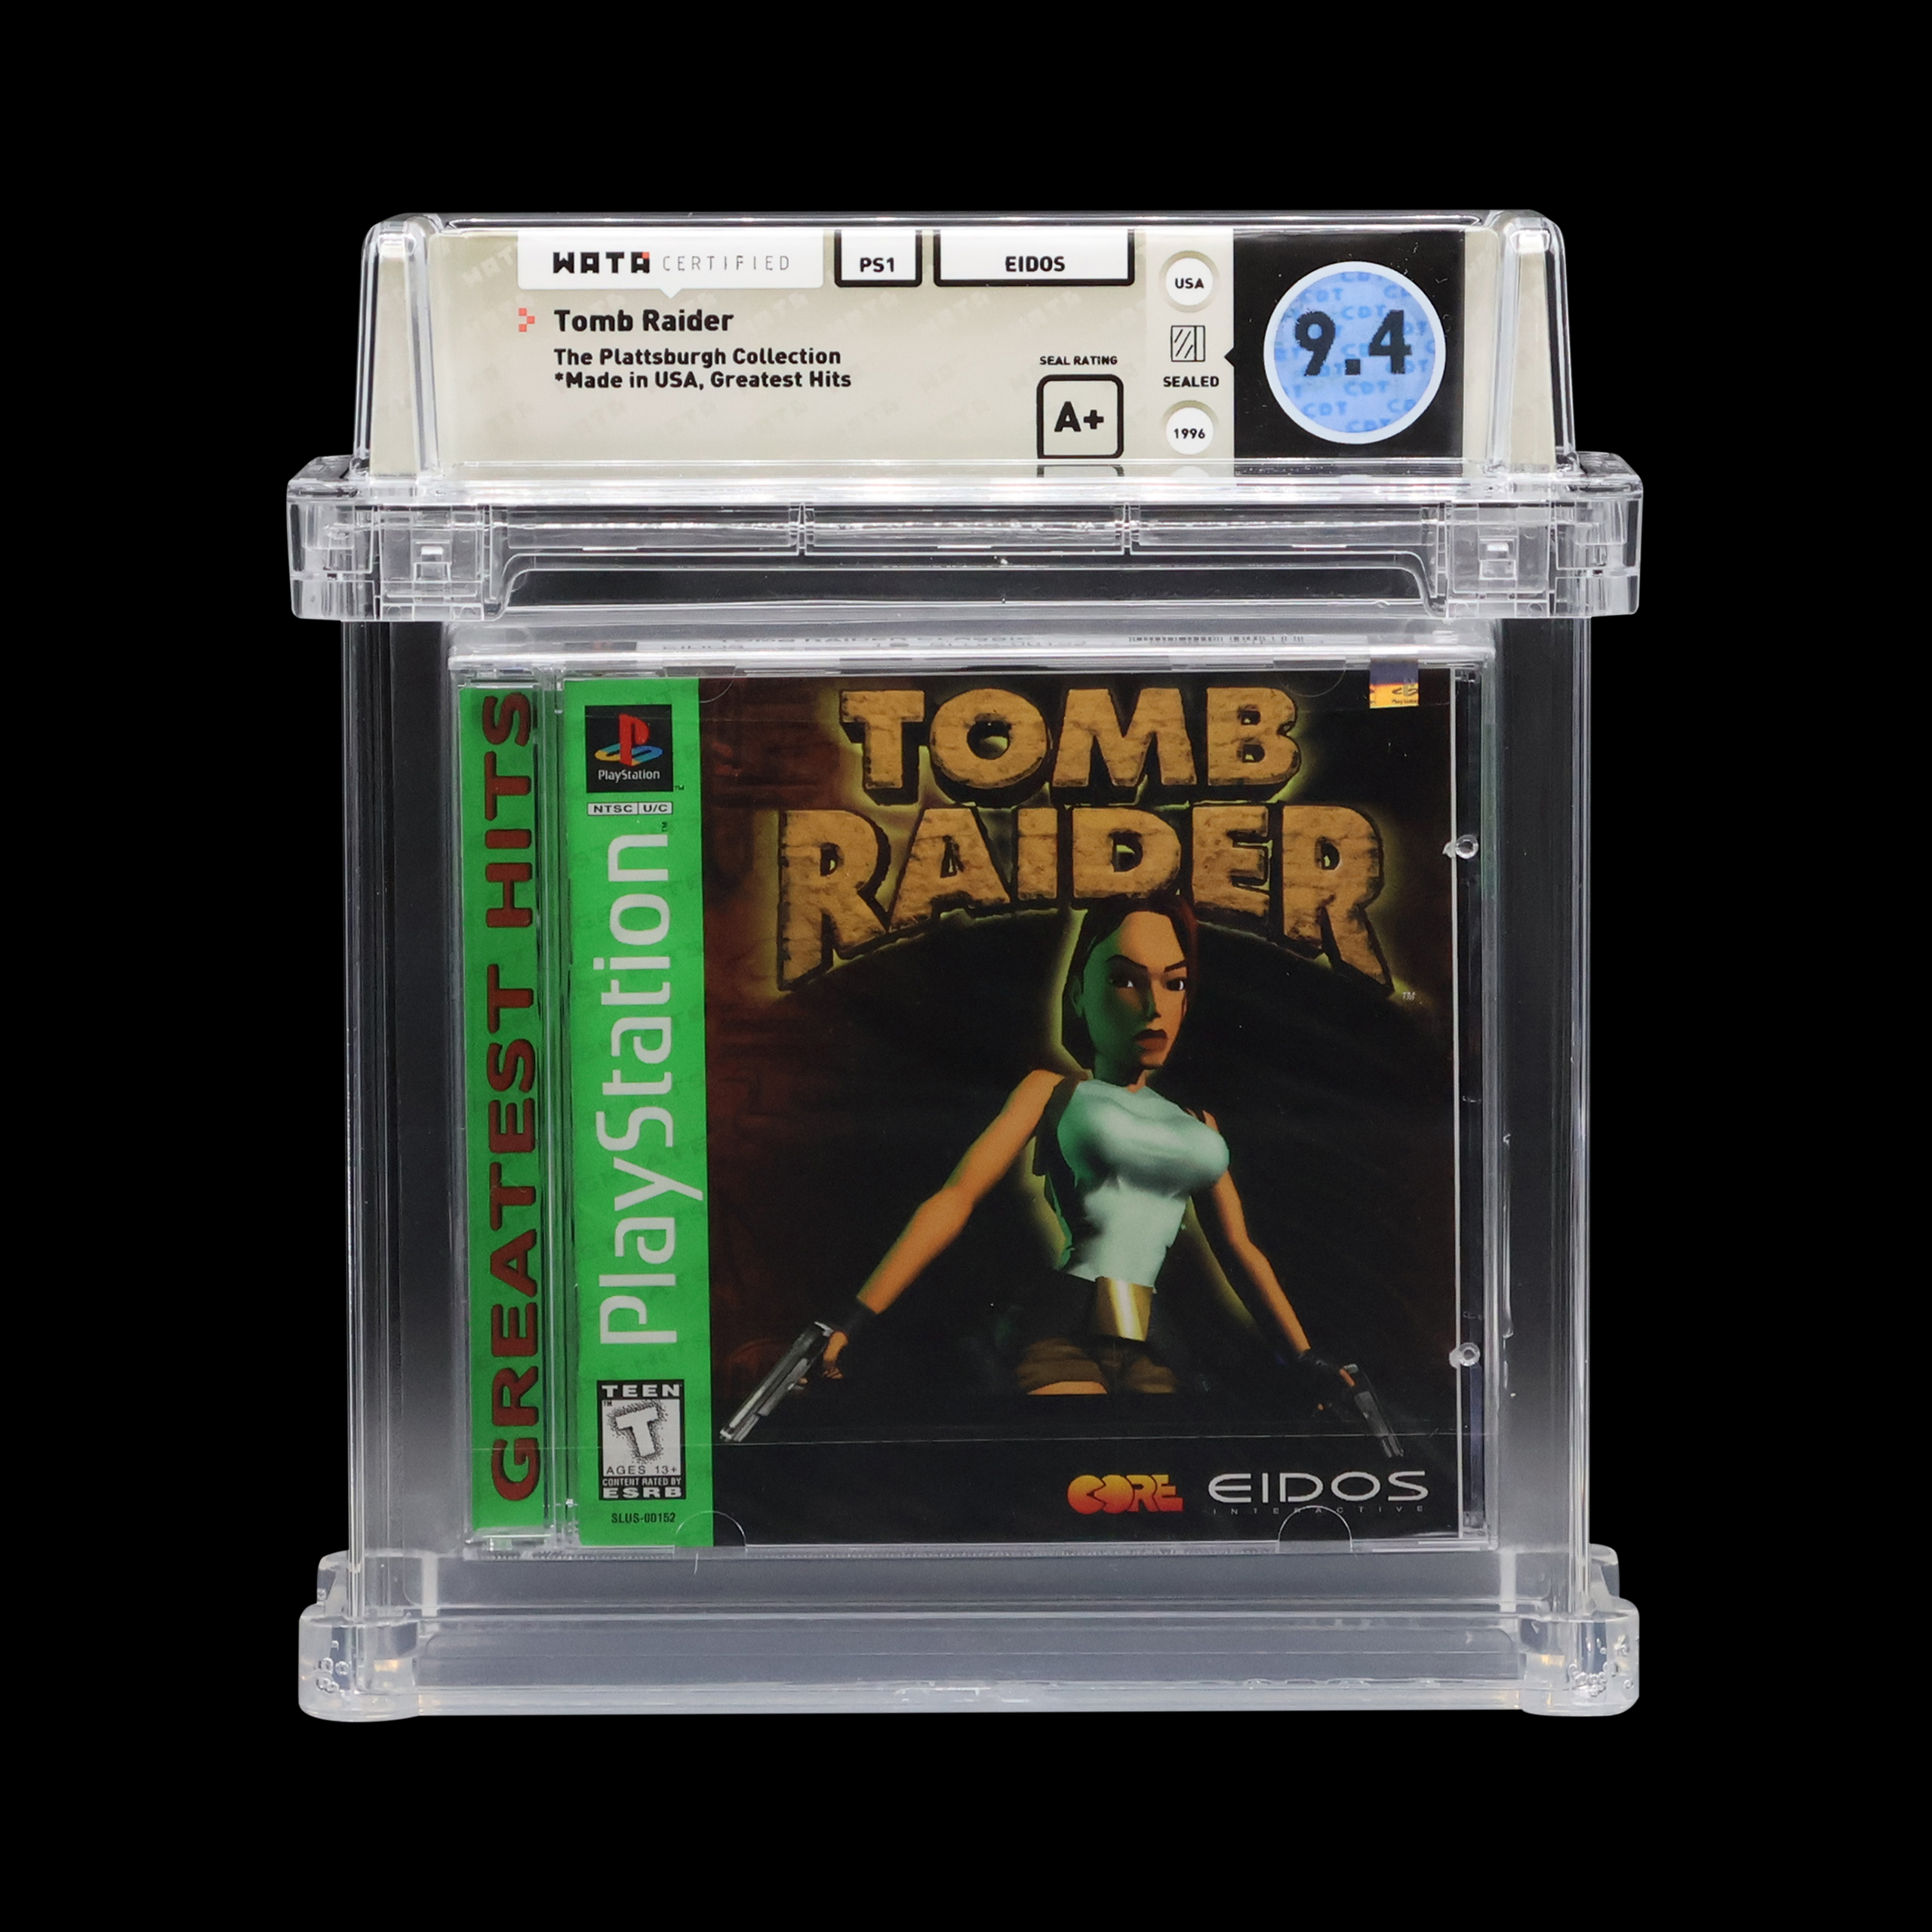 Vintage Tomb Raider Greatest Hits PlayStation game with WATA 9.4 rating.